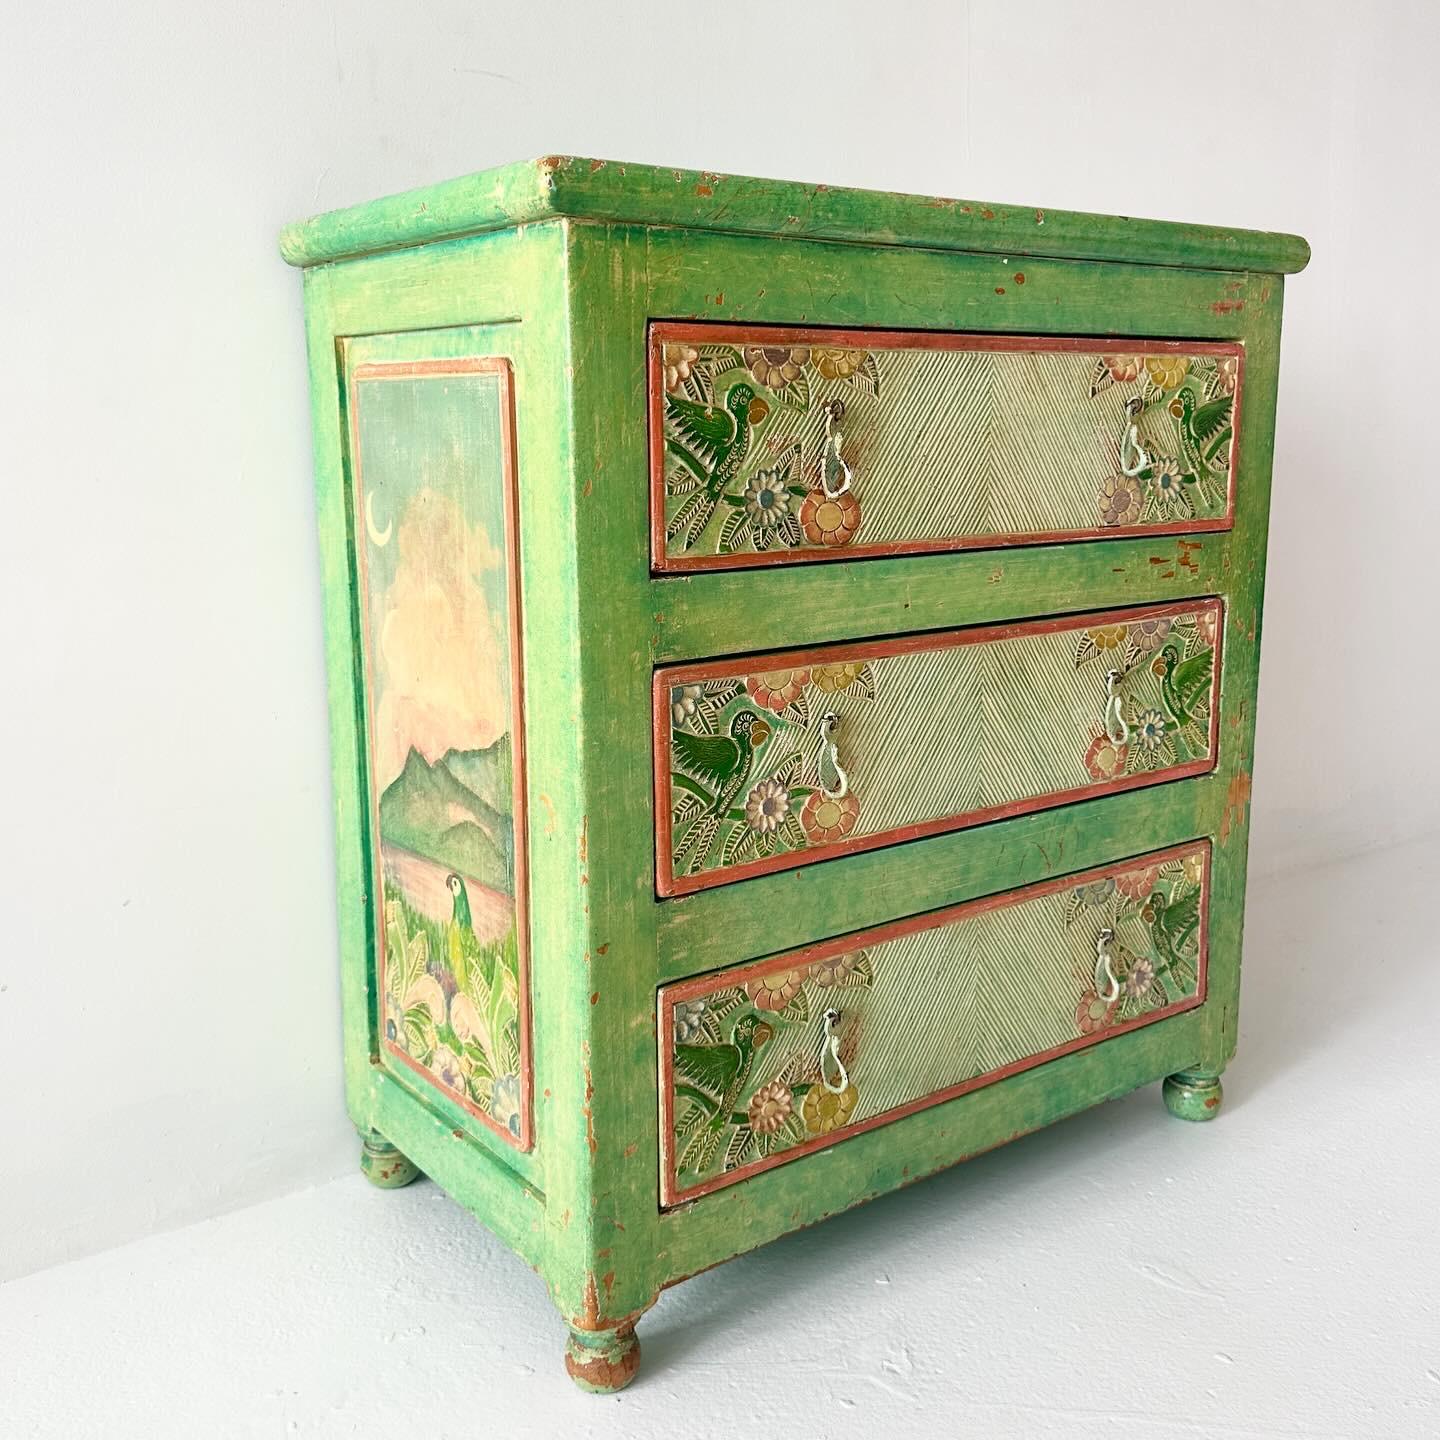 Vintage tropical carved wood and hand painted dresser by Arte De Mexico (San Fernando Valley, 1990s).

Vintage condition, patina and wear on paint.